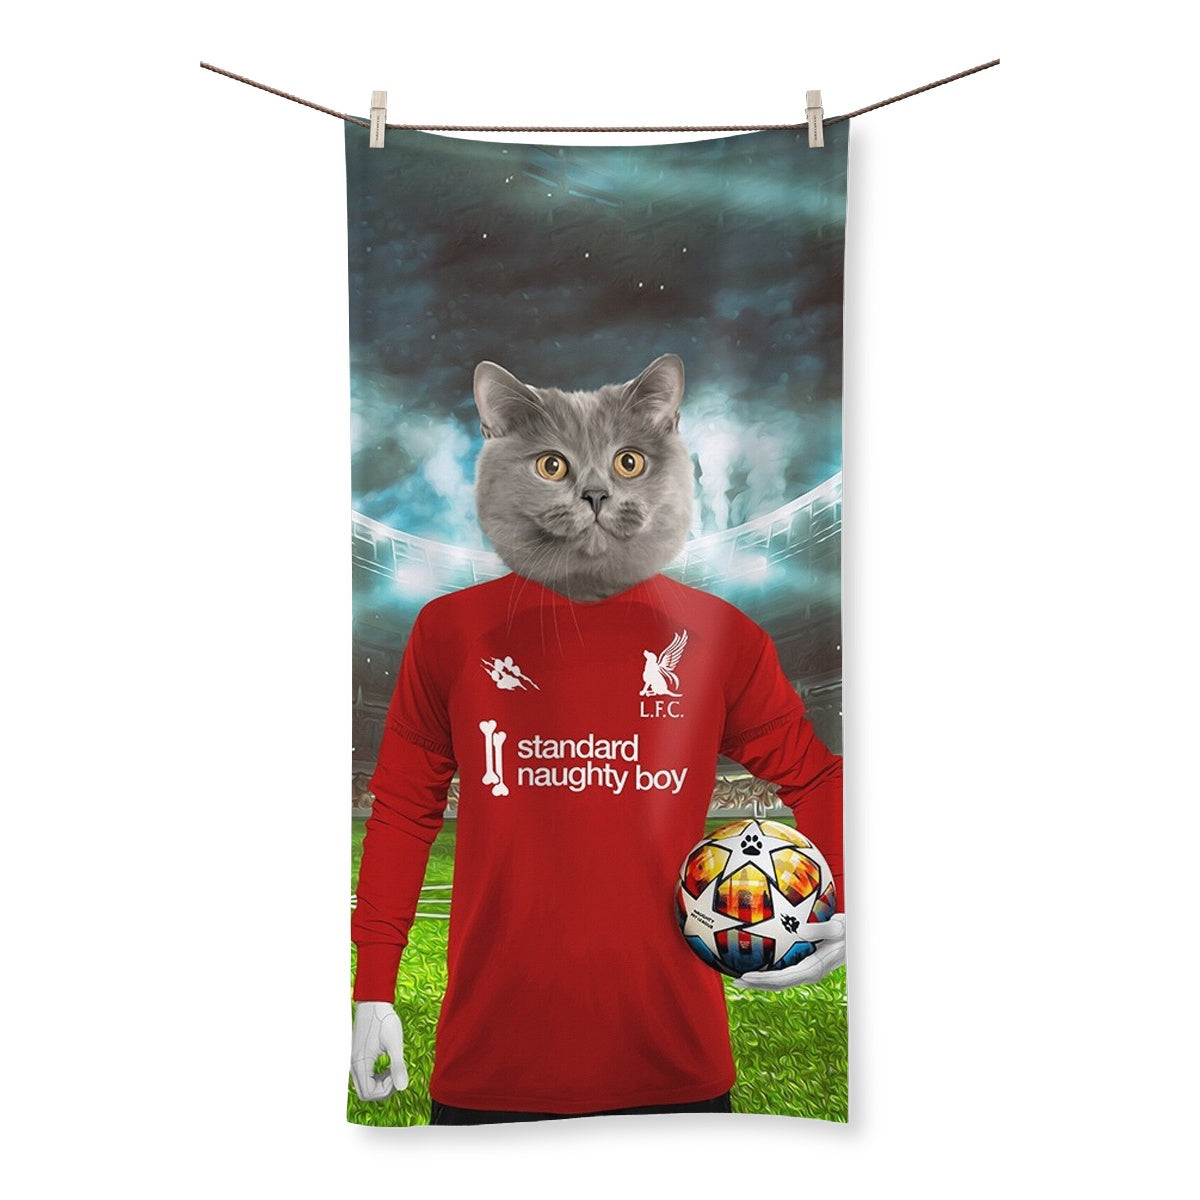 Liverpawl Football Club Paw & Glory, paw and glory, blanket with your dog on it, personalized blankets for dogs, Custom dog blanket, pet on blanket, personalized pet blanket, custom dog blanket, Pet Portrait blanket,